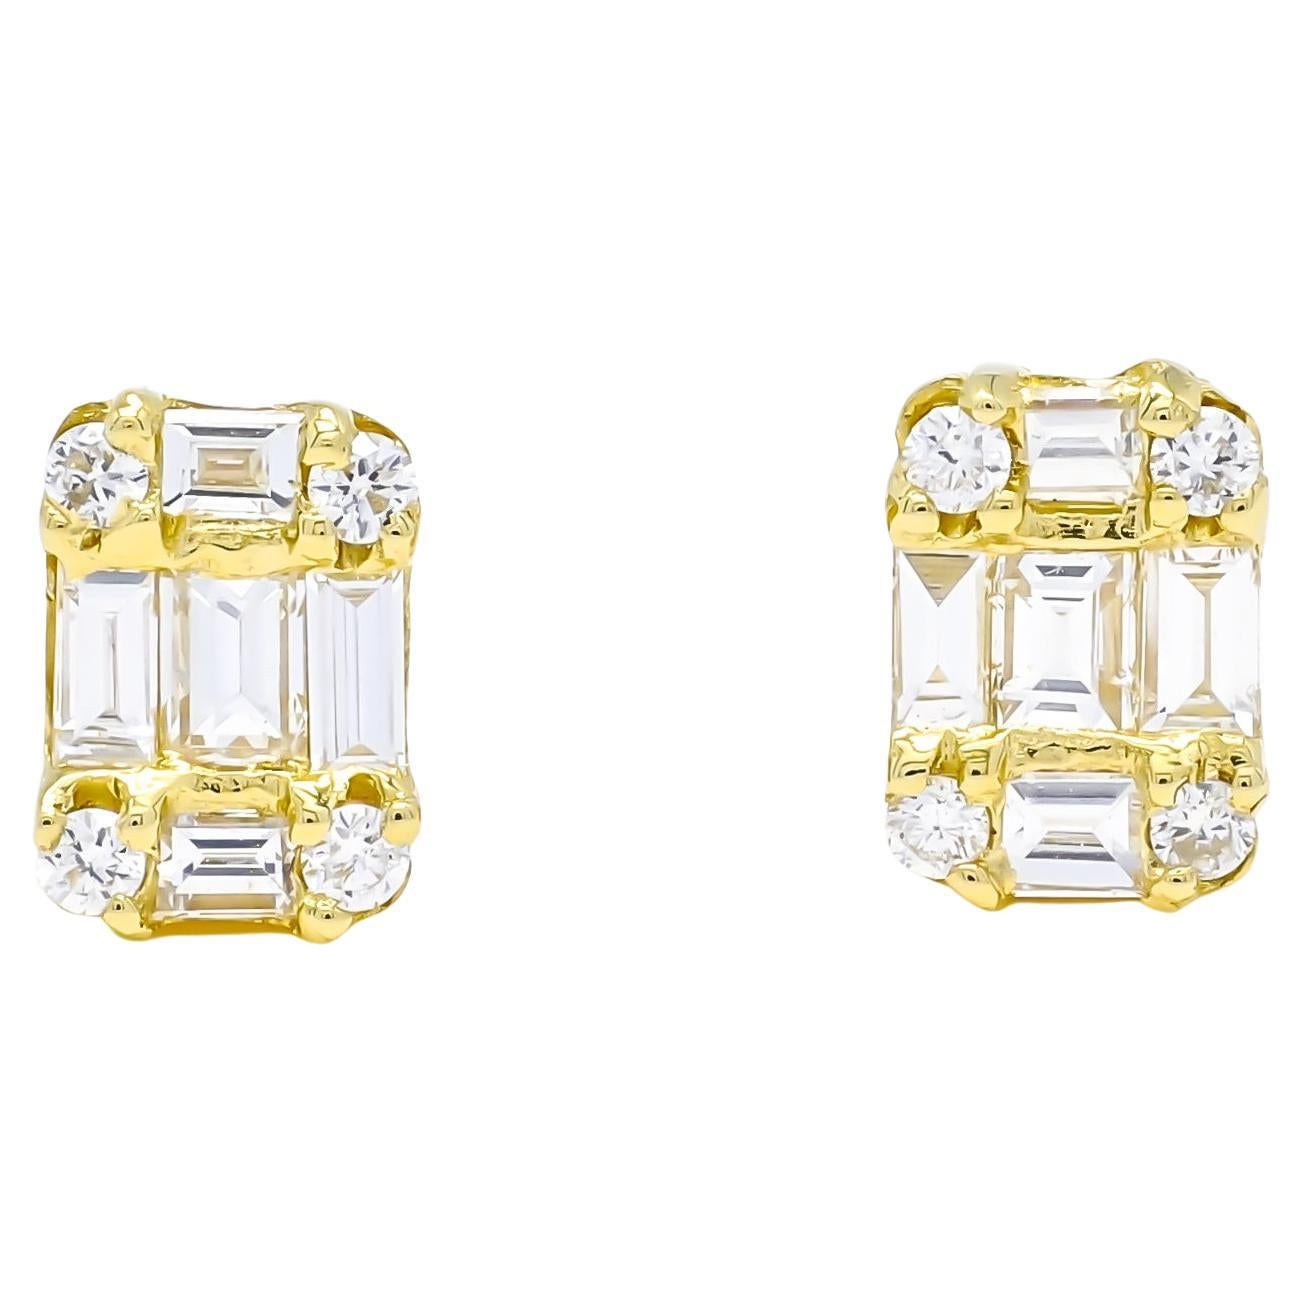 Baguette round diamond cluster simple stud earrings are a versatile piece of jewelry that can be worn for a variety of occasions. For a wedding, these earrings can add an elegant touch to any bridal look, without being too overpowering. The